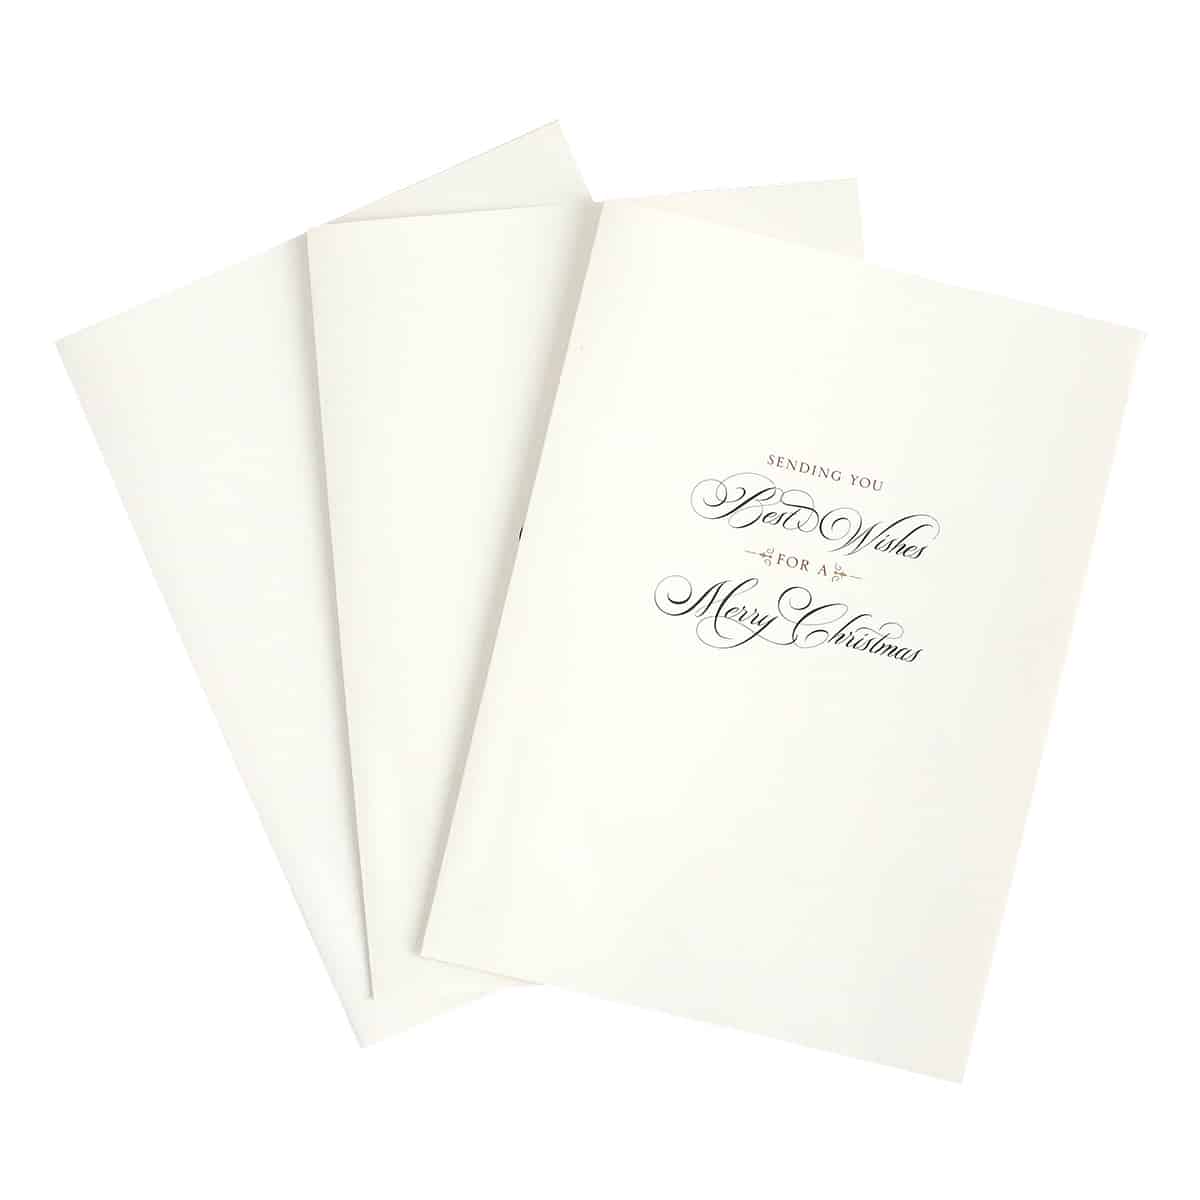 a set of three wedding cards with a white envelope.